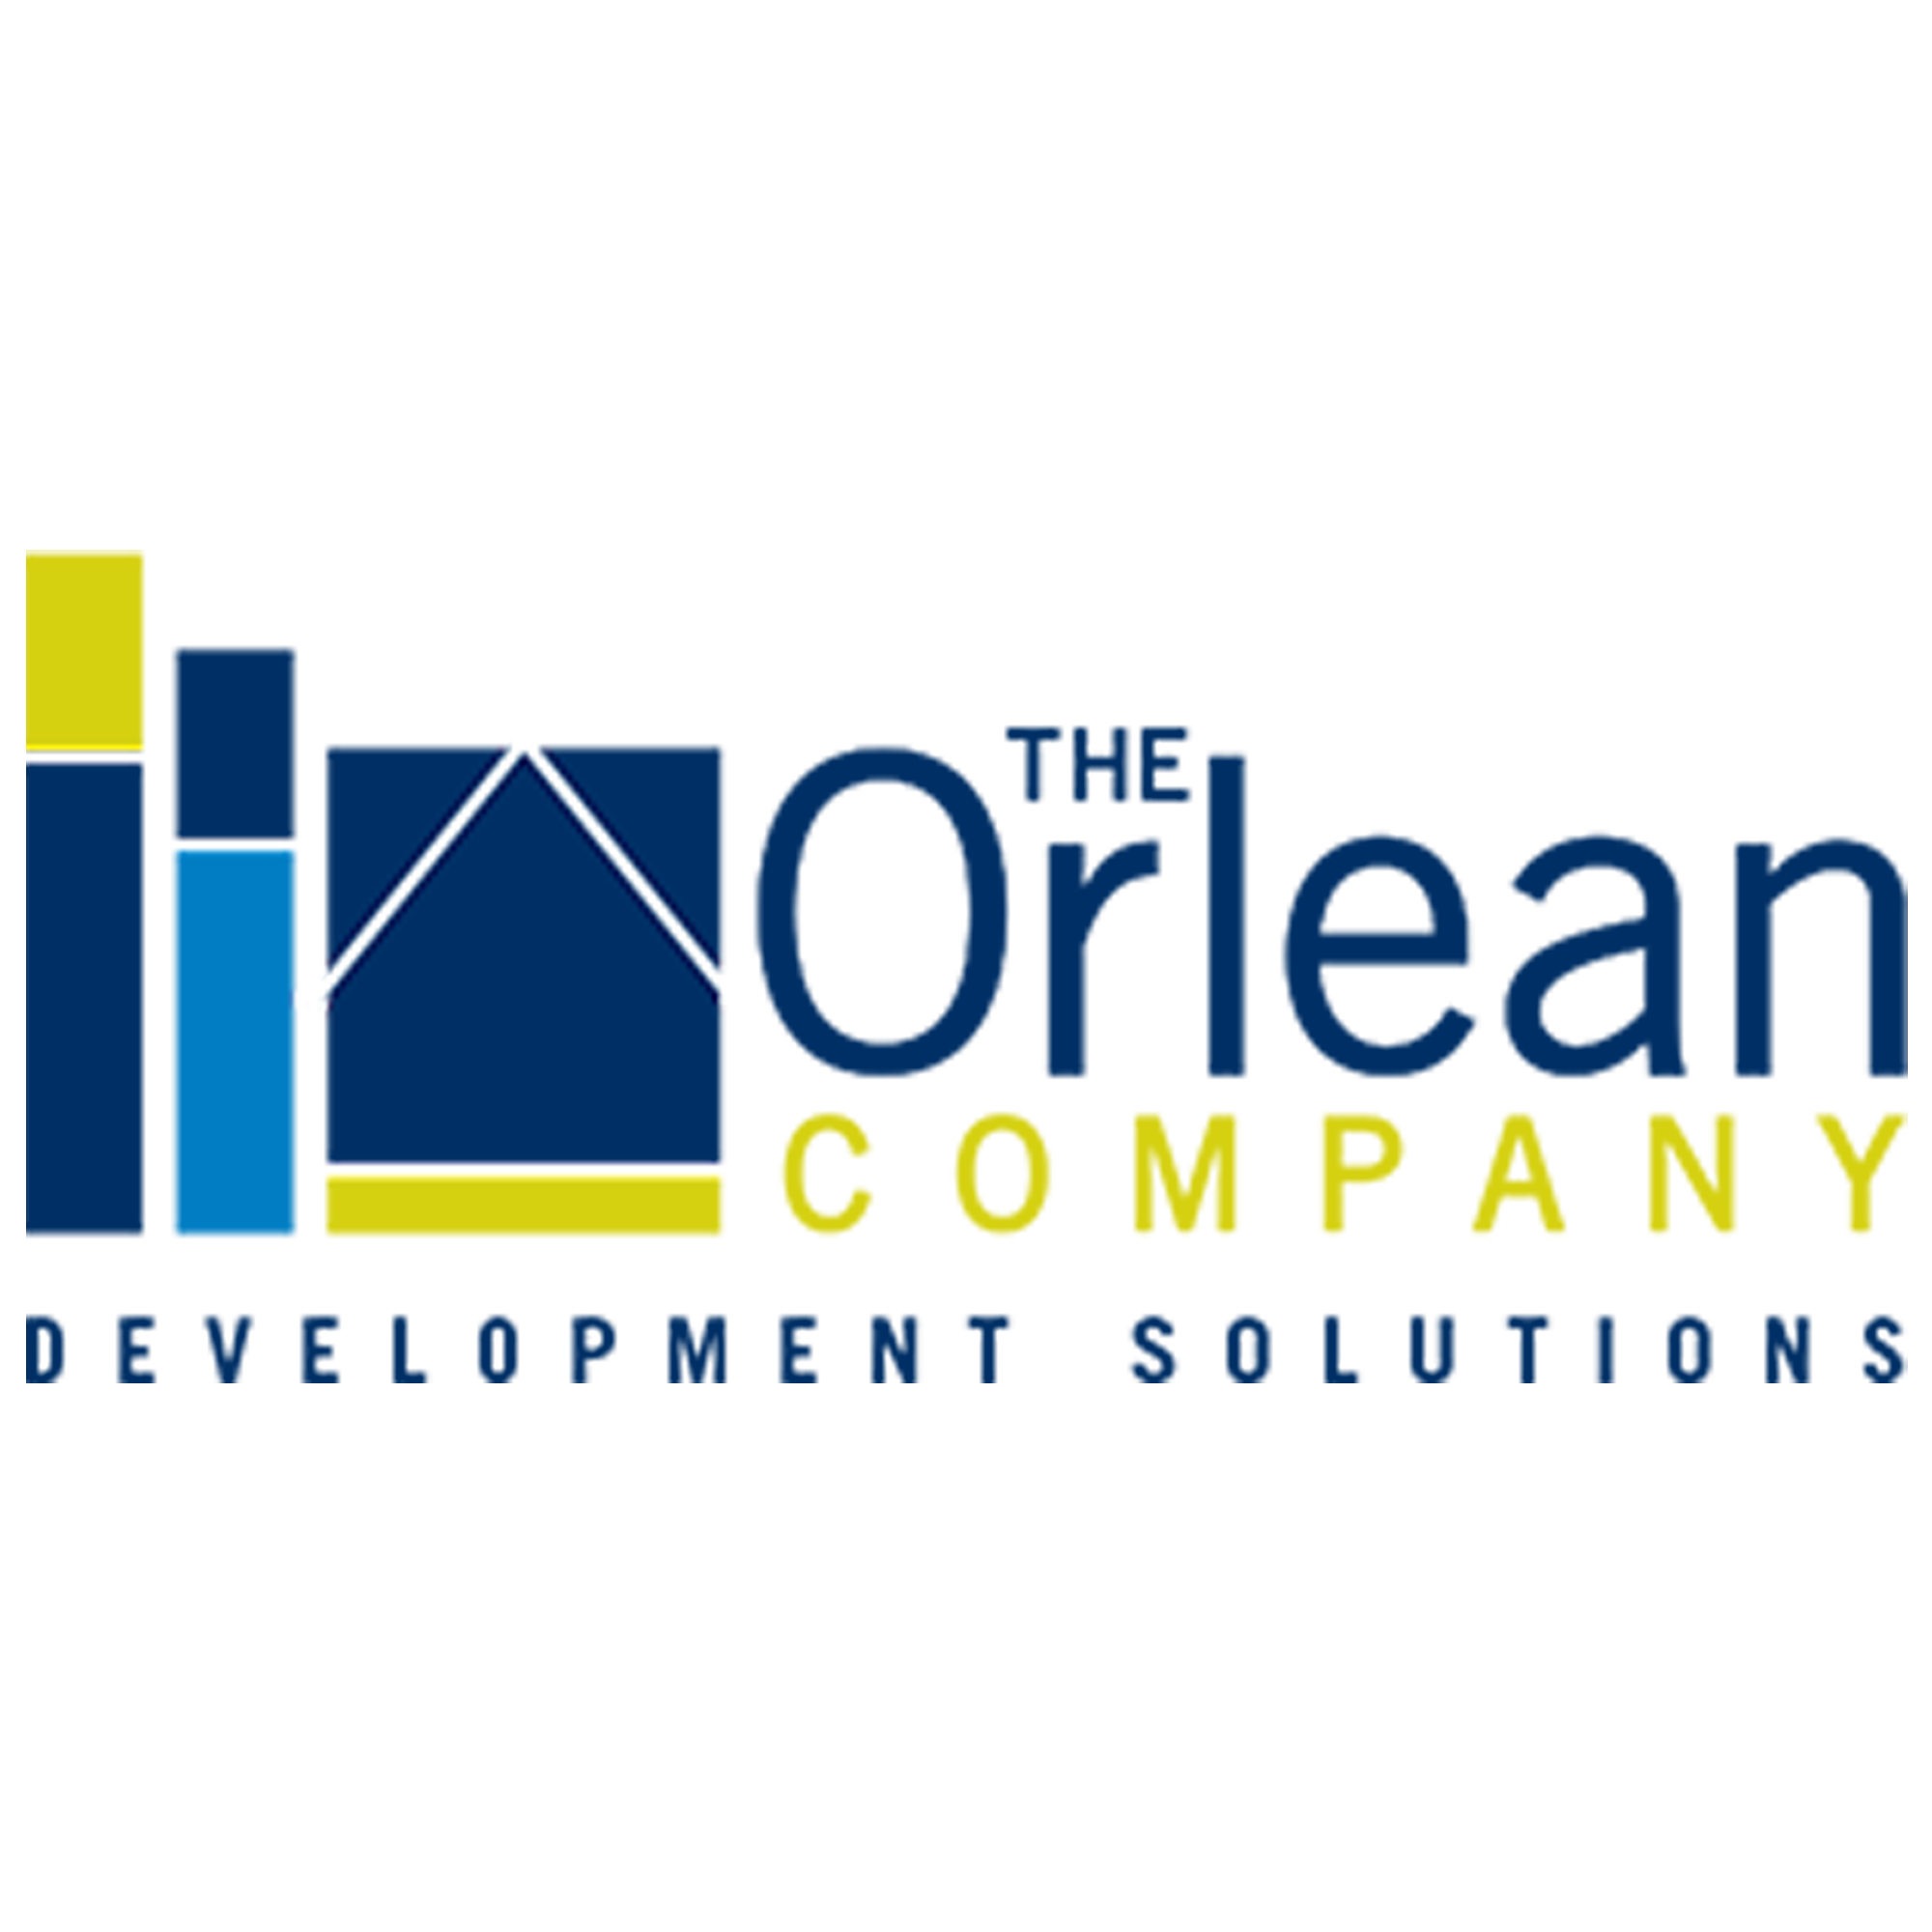 This image is the logo for The Orlean Company.